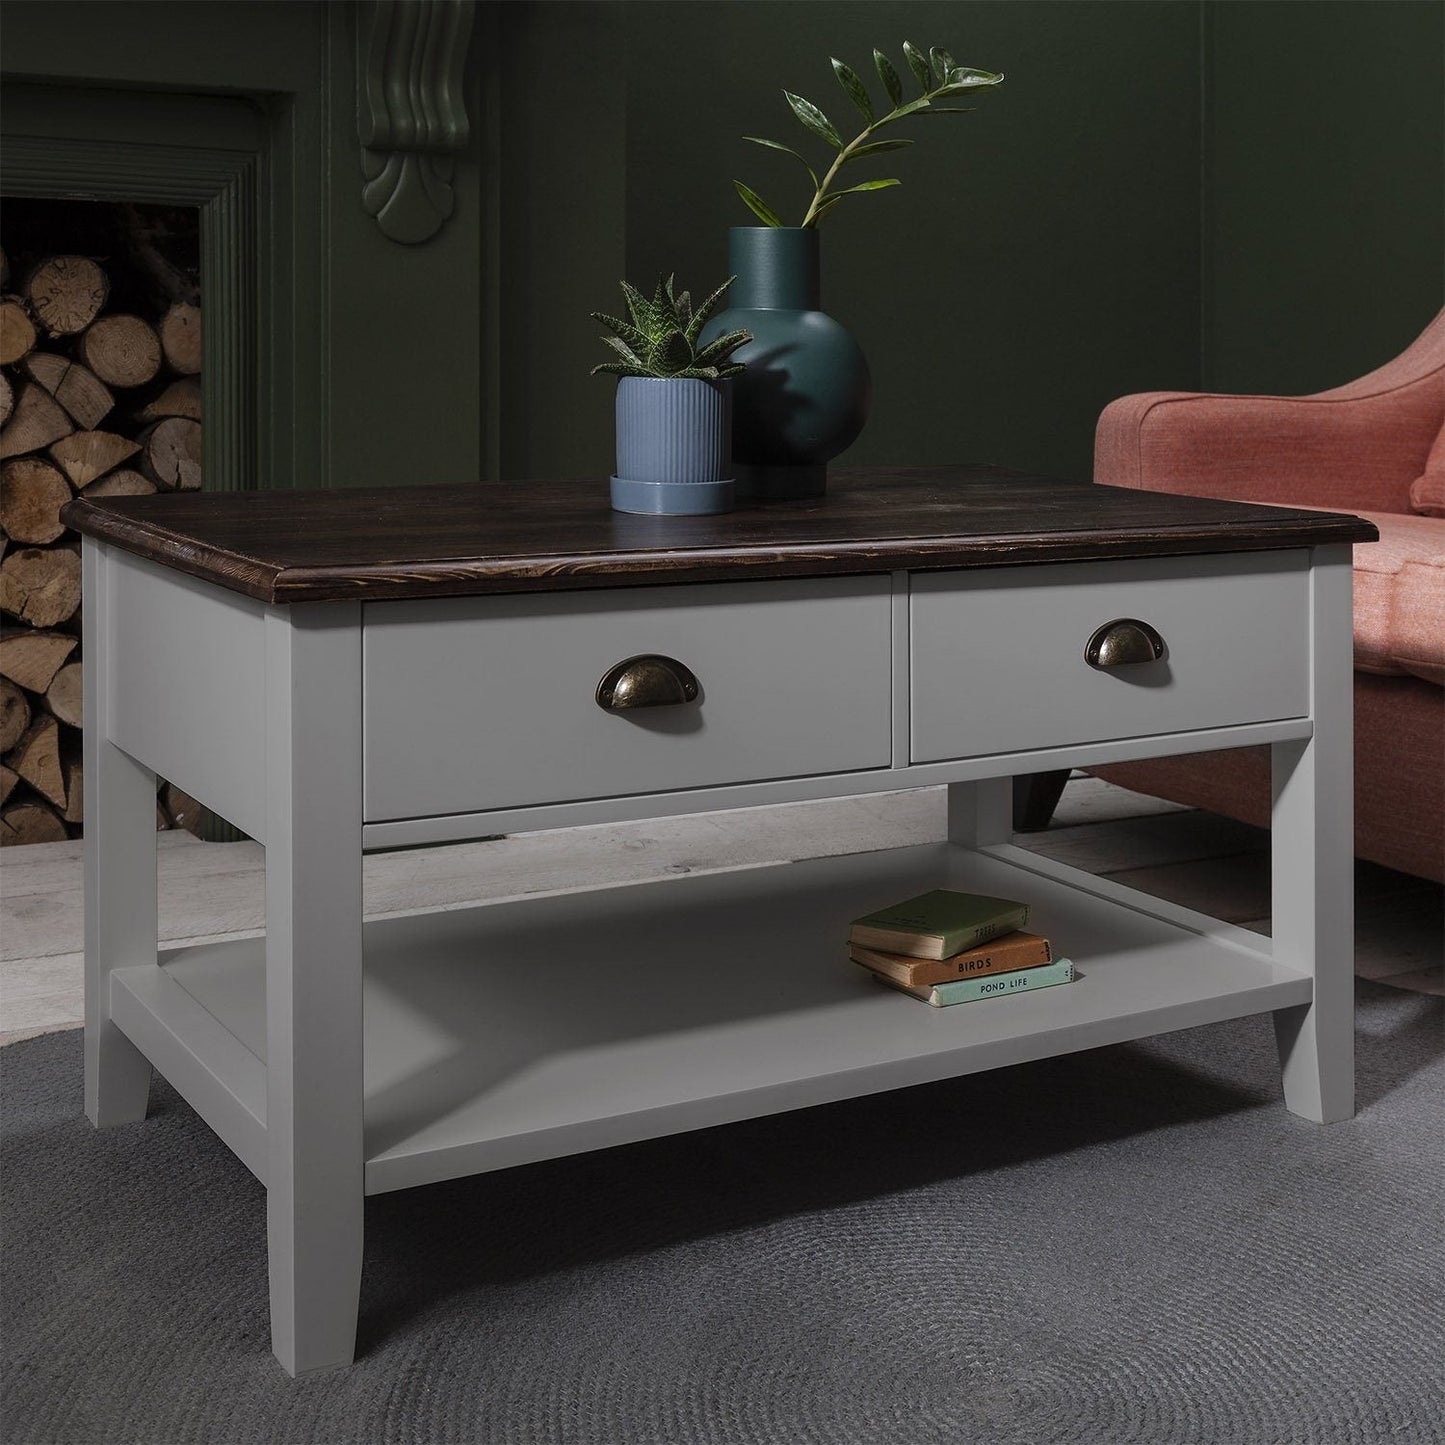 Grey Wooden Coffee Table with 4 Storage Drawers - Laura James